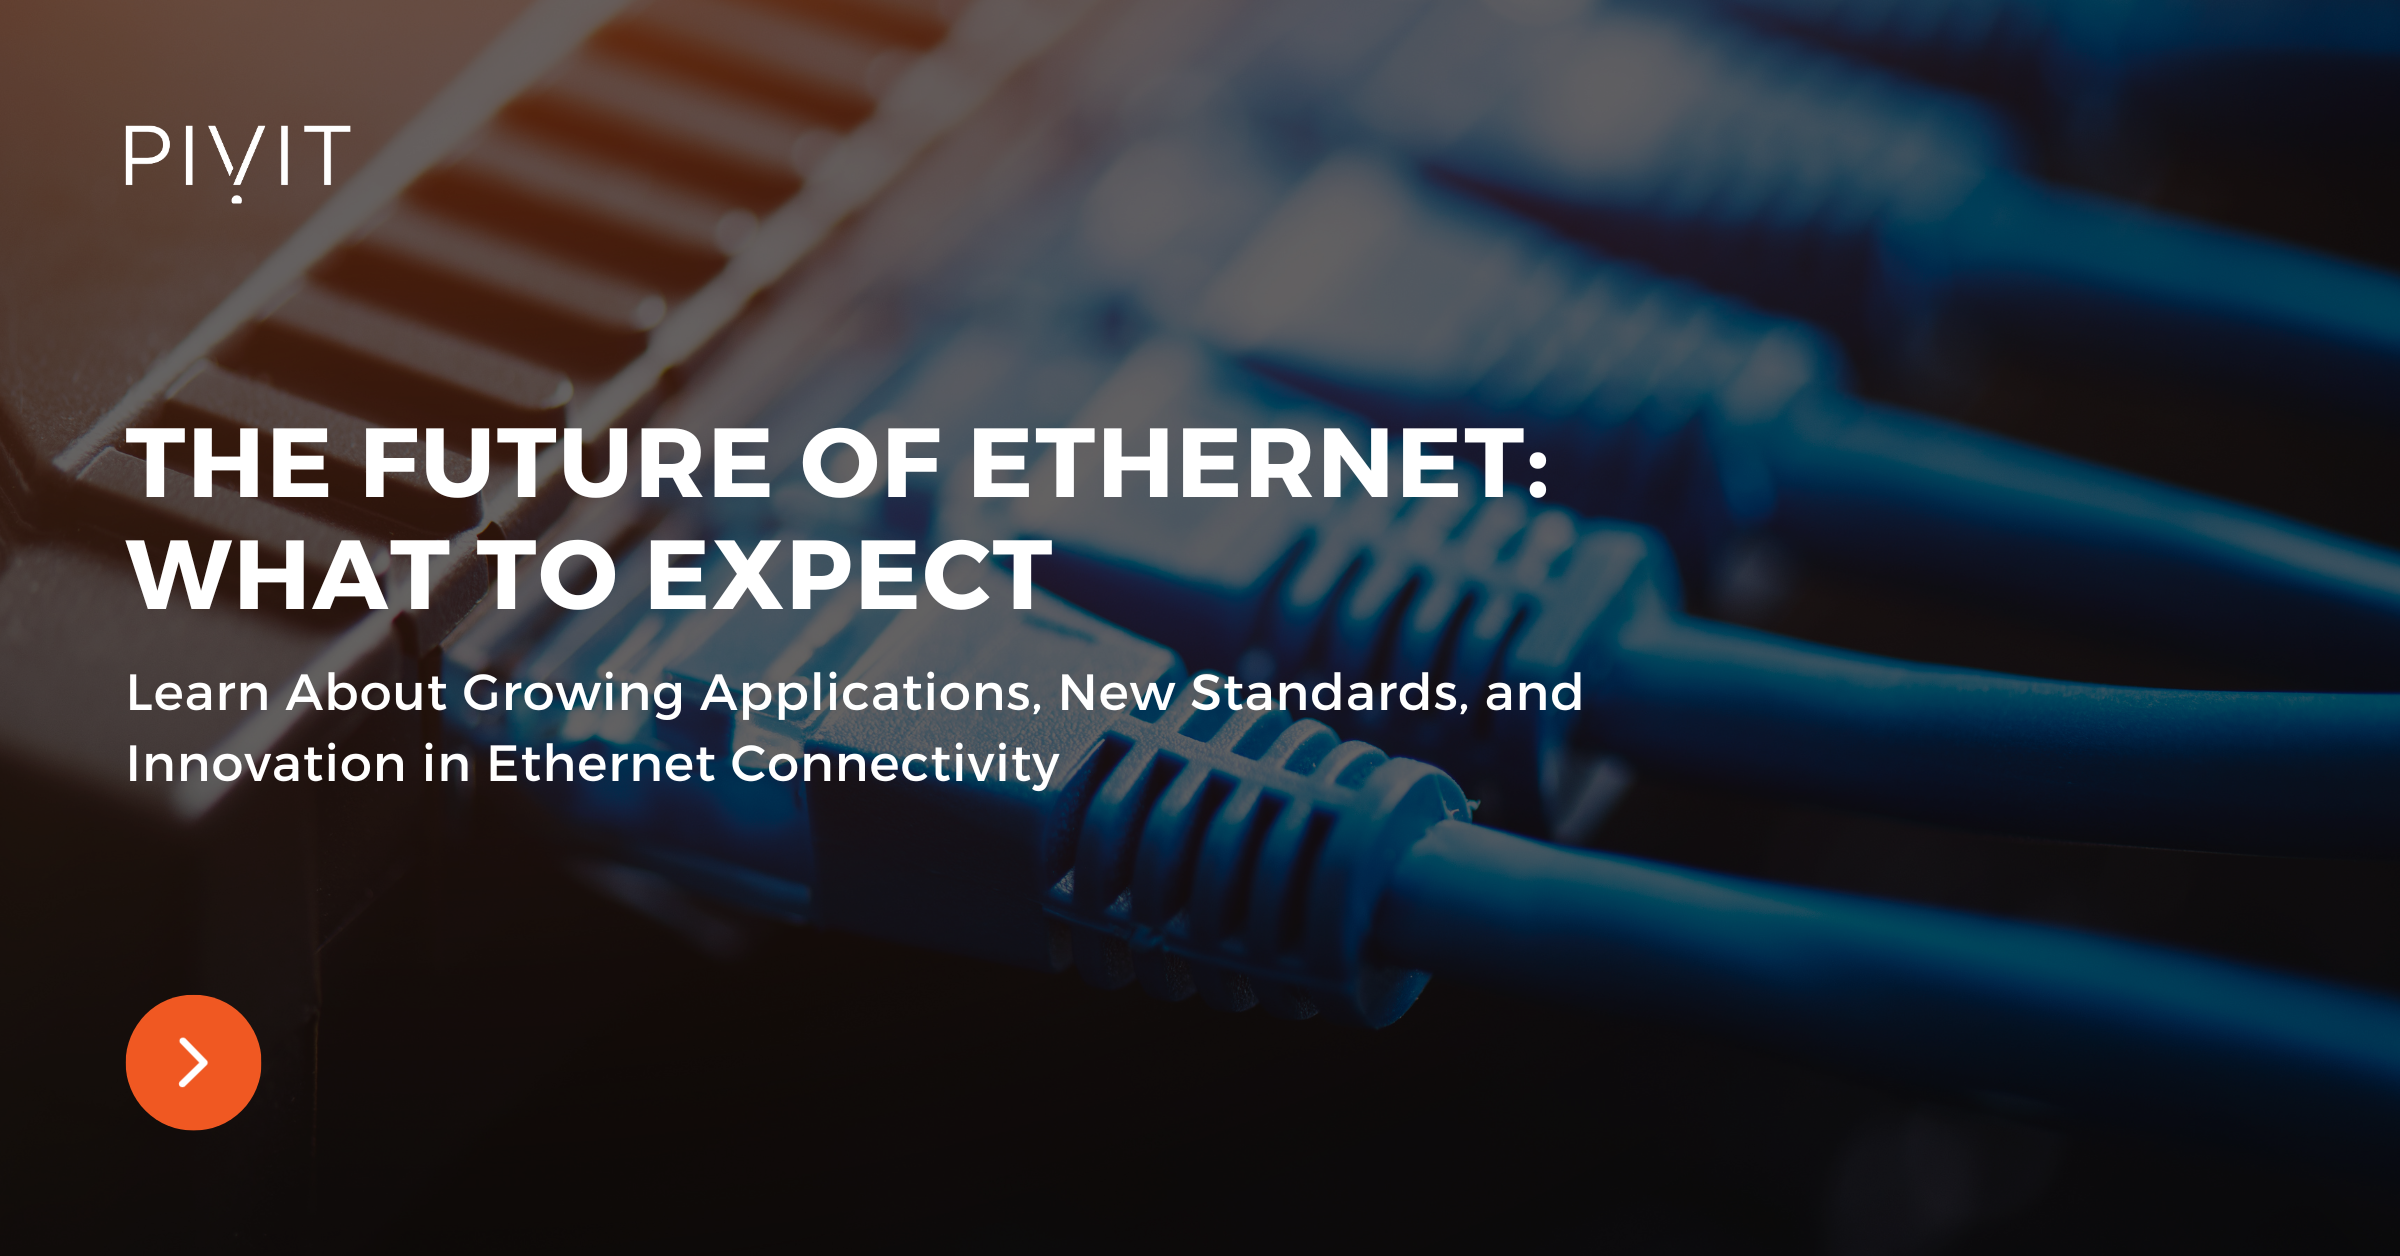 The Future of Ethernet: What to Expect - Learn About Growing Applications, New Standards, and Innovation in Ethernet Connectivity